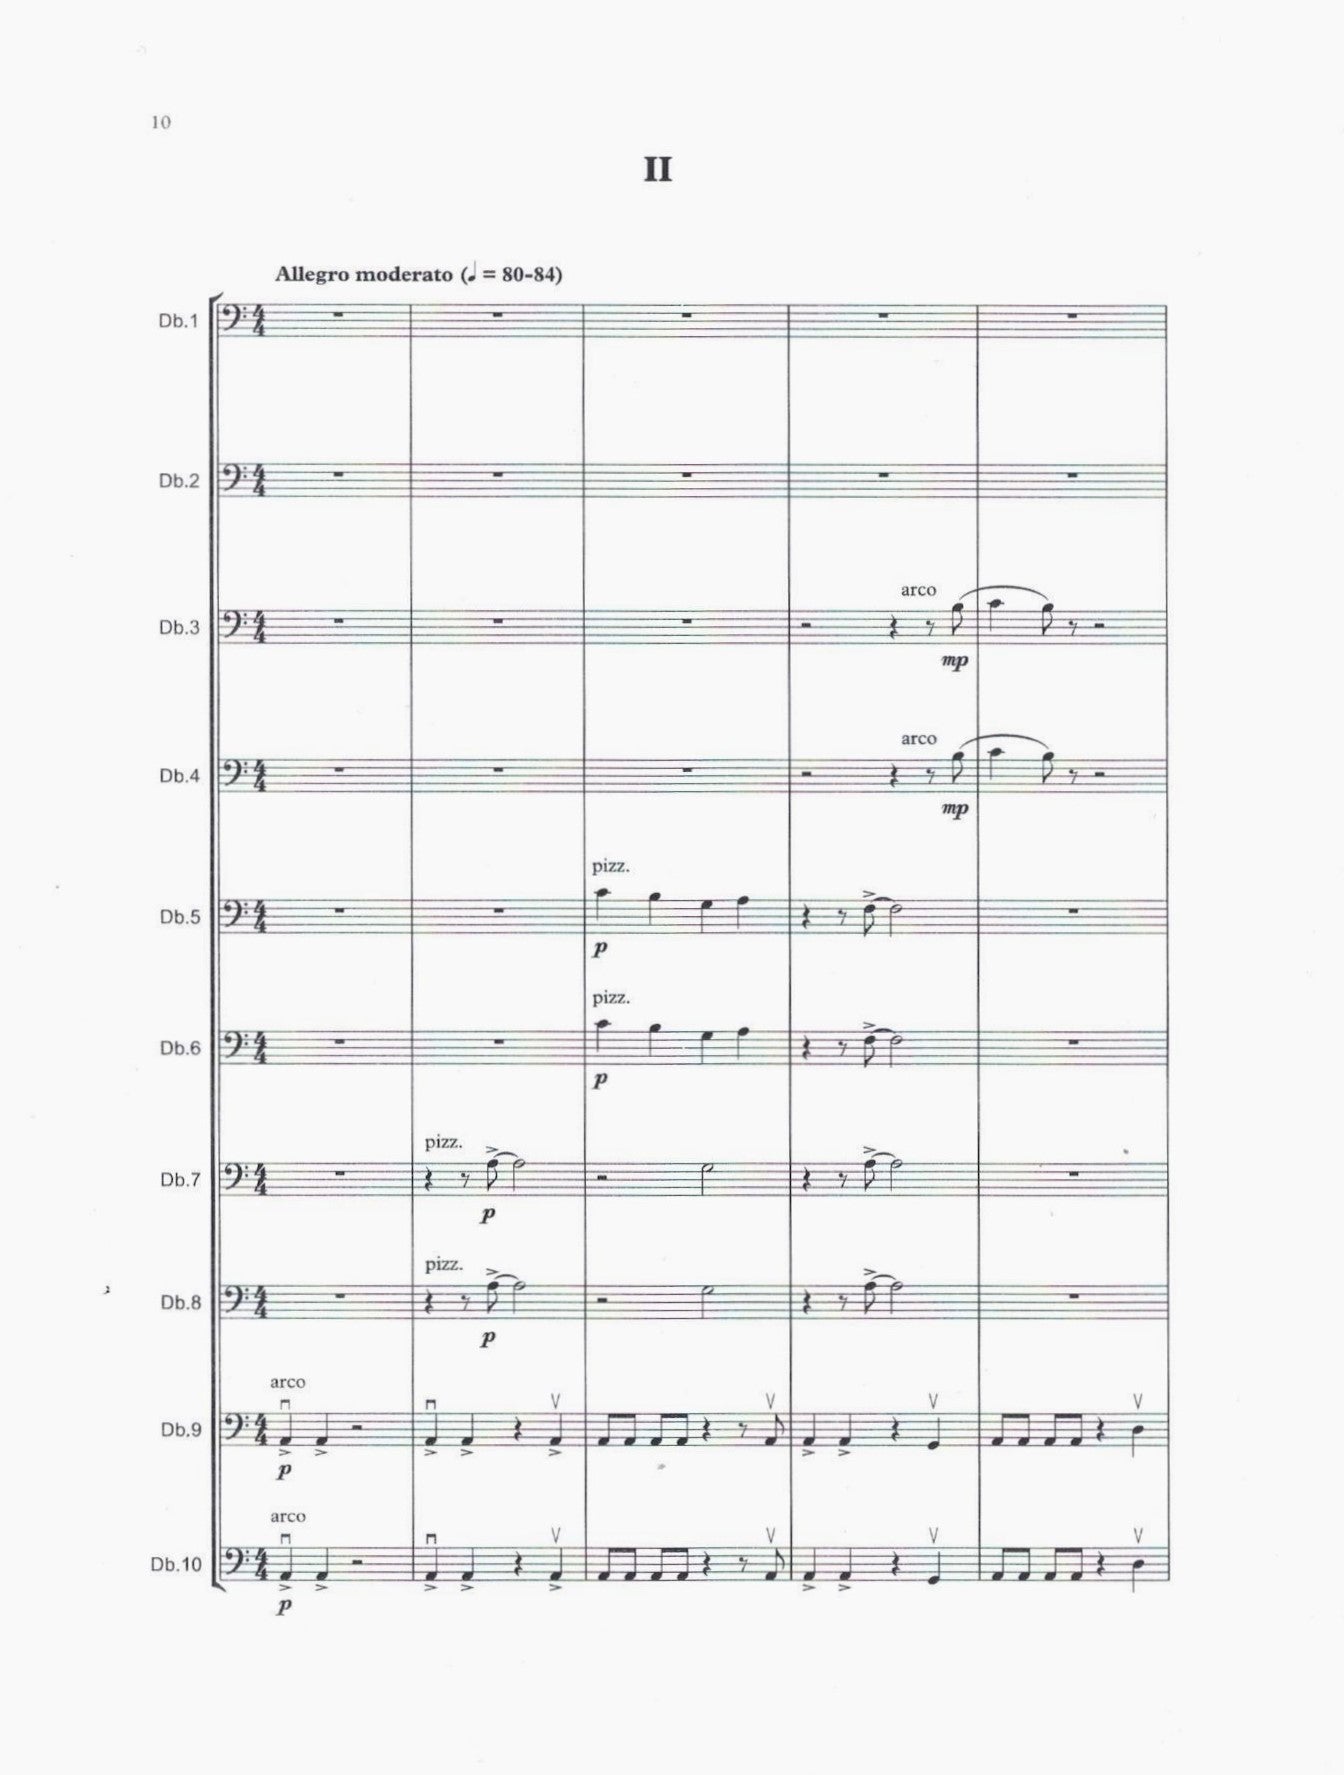 Teppo Hauta-aho: The Mini-Bass Symphony for Massed Double Bass Ensemble (in 10 parts)